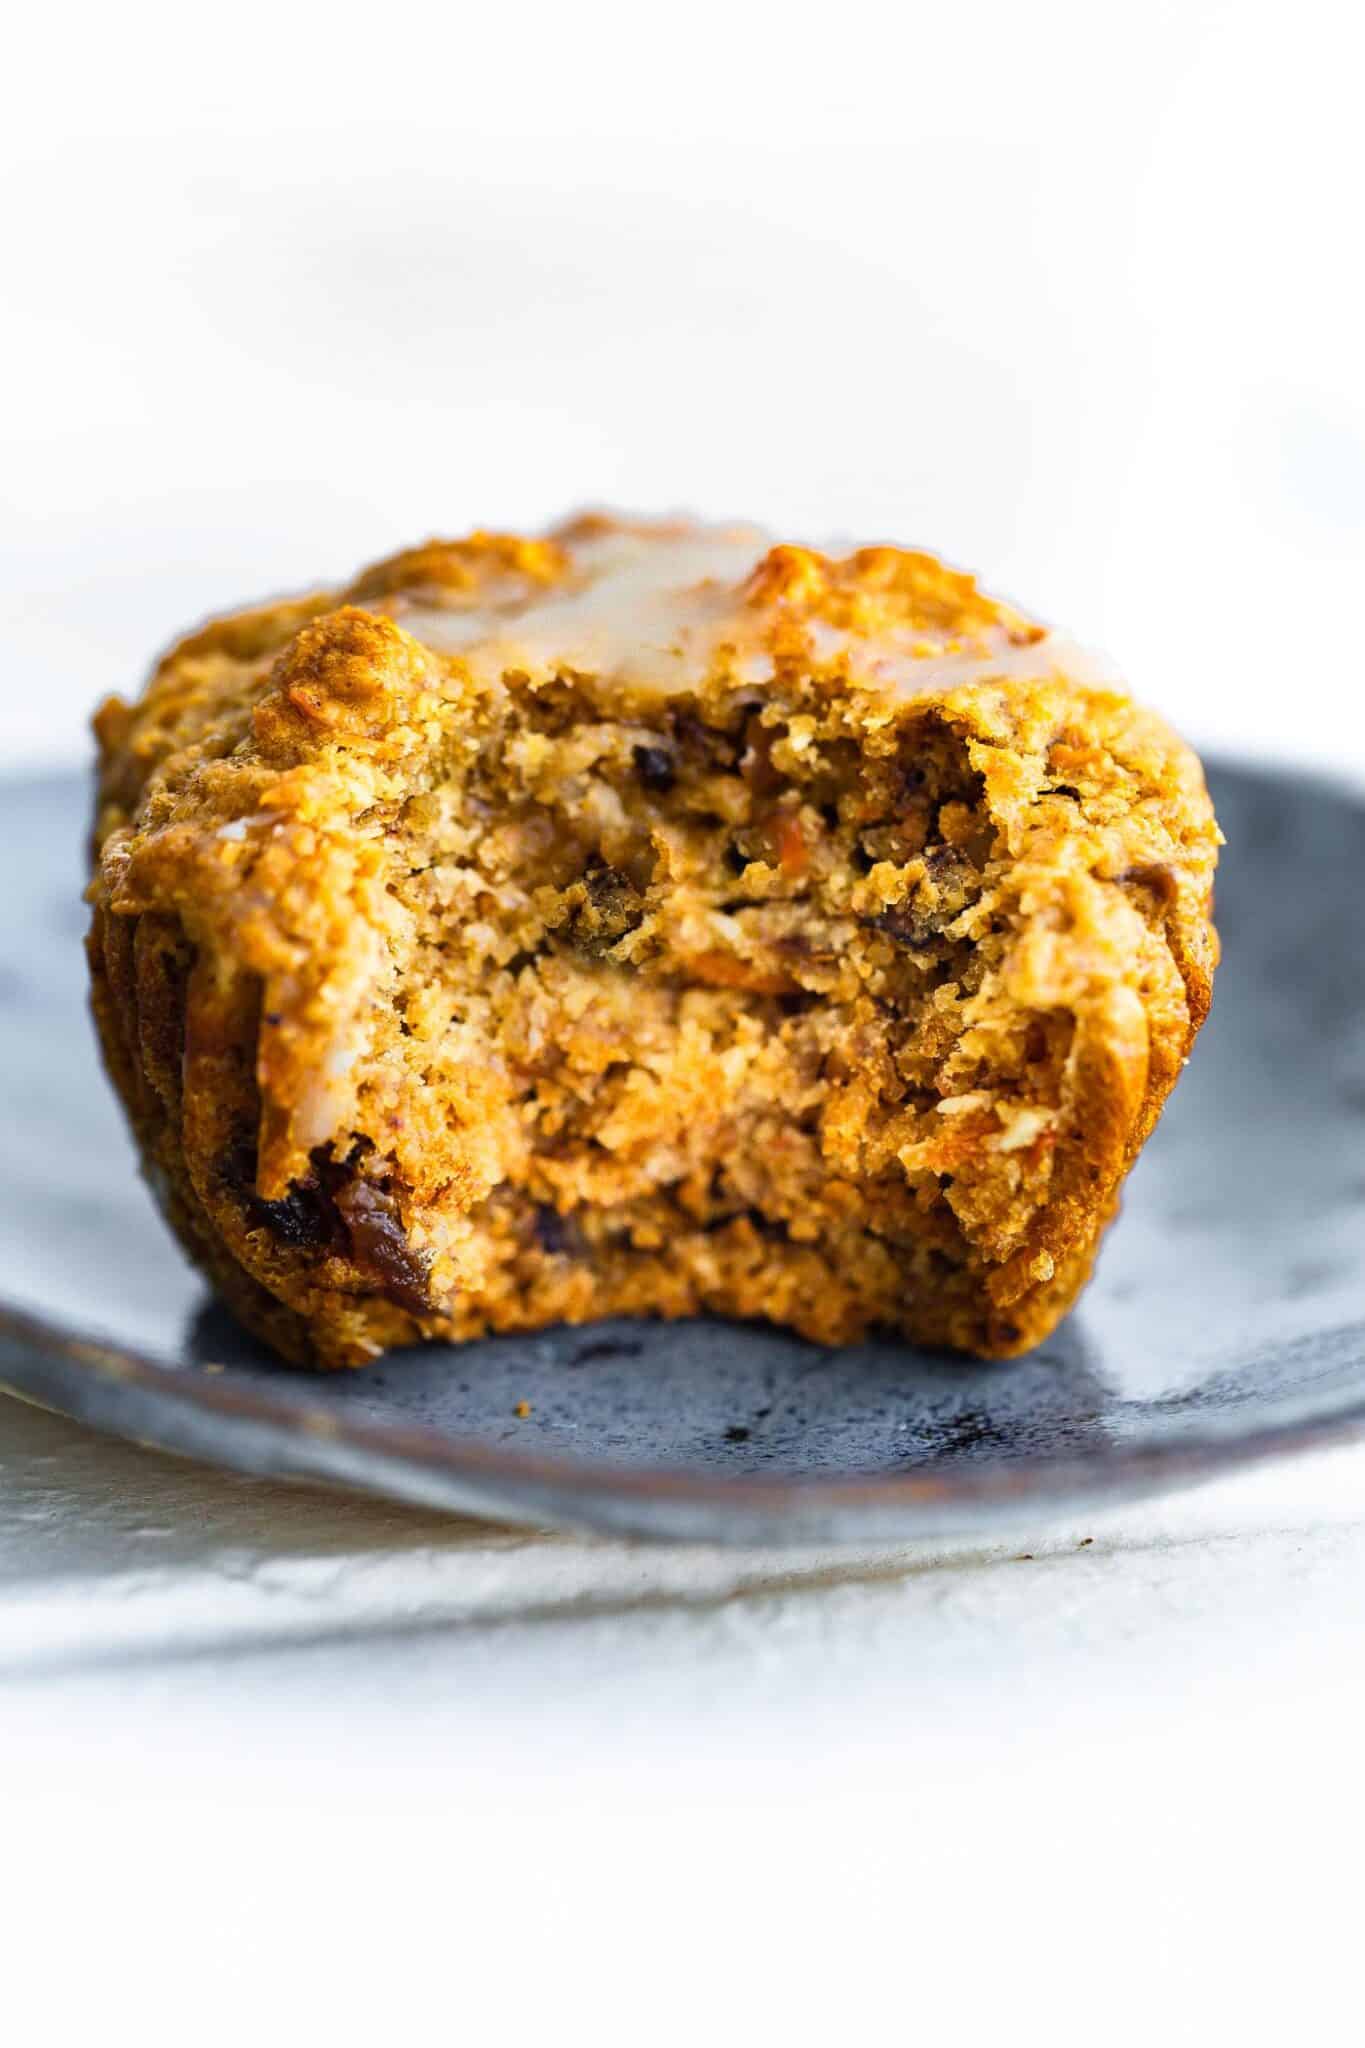 Up close photo of a gluten free carrot cake muffin with a bite taken out.